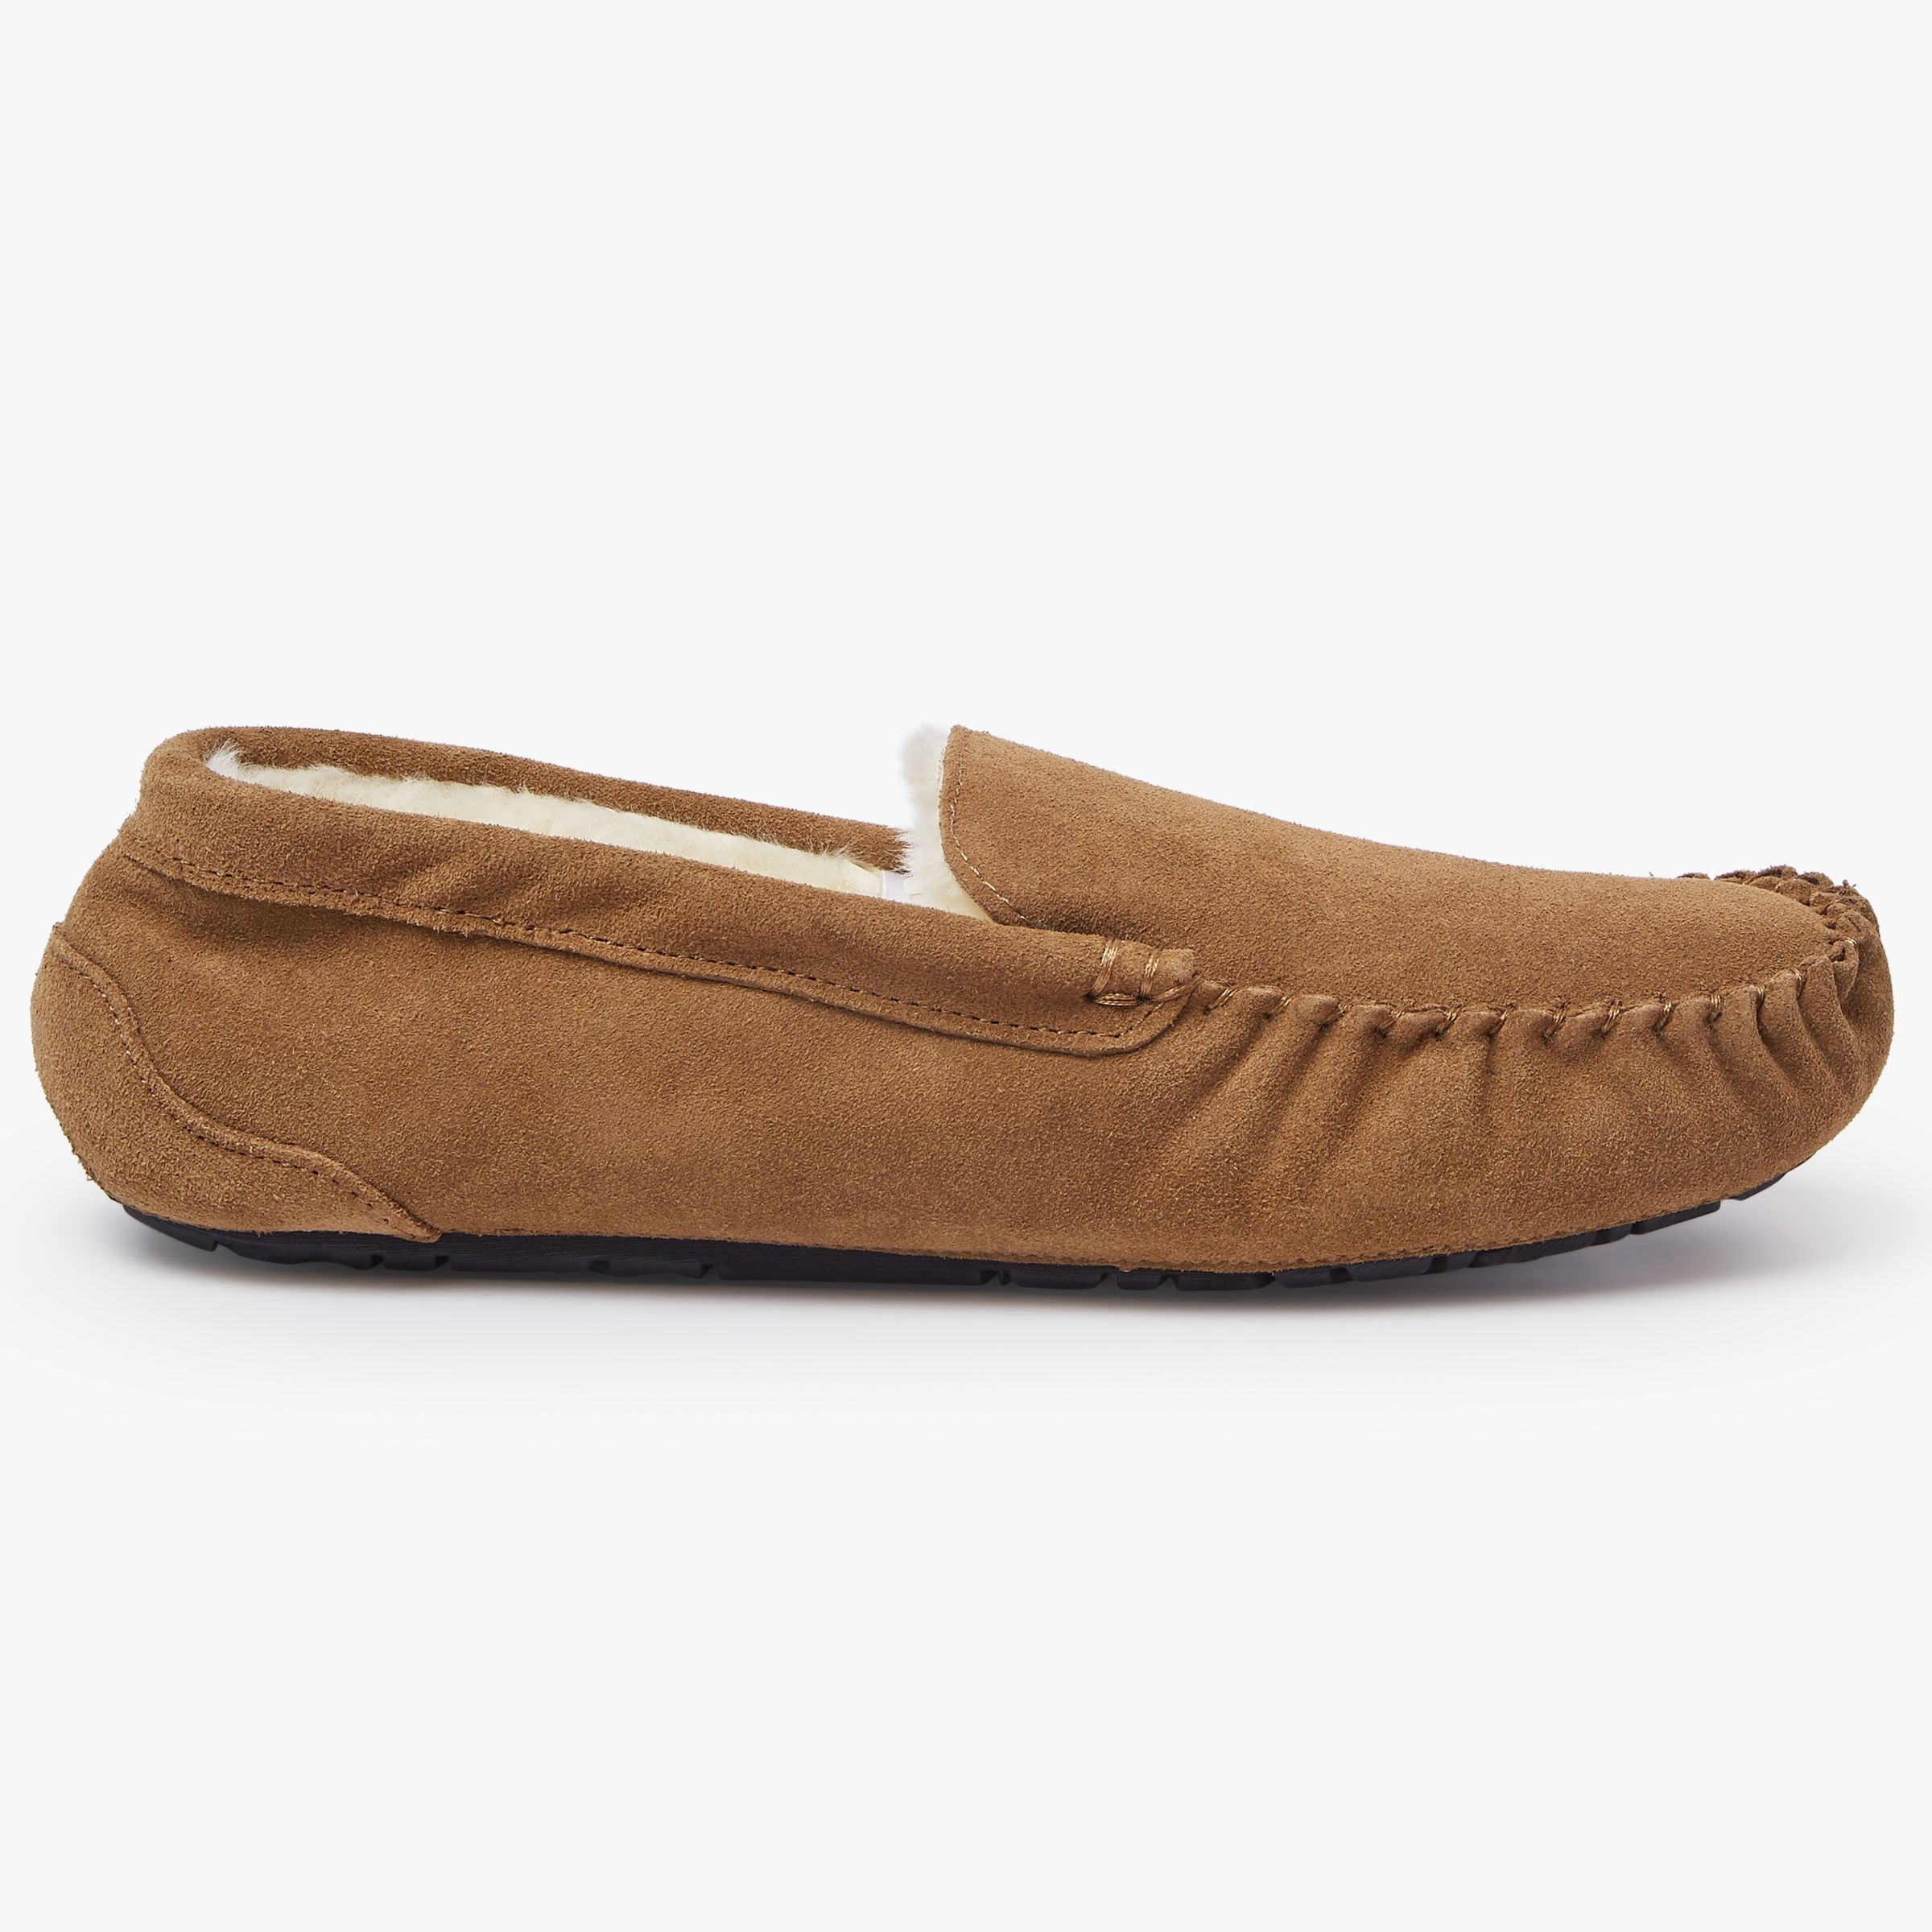 John Lewis & Partners Moccasin Faux Fur Lined Slippers, Chestnut, 8